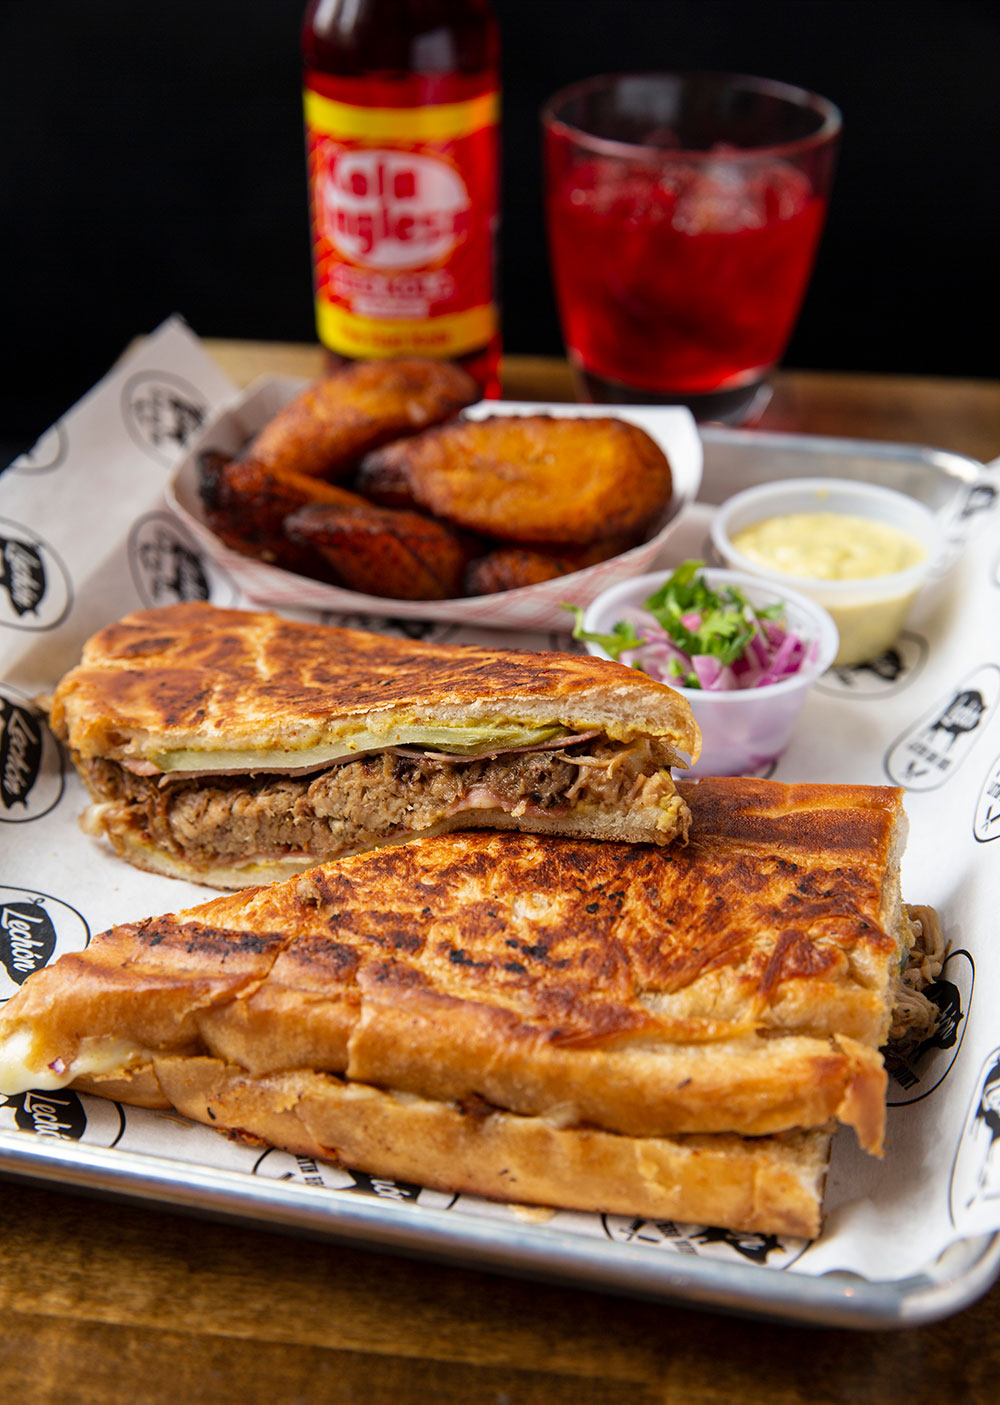 Lechon Latin BBQ’s take on a classic Cuban sandwich features their signature pulled lechon pork and pairs perfectly with a side of plantains.